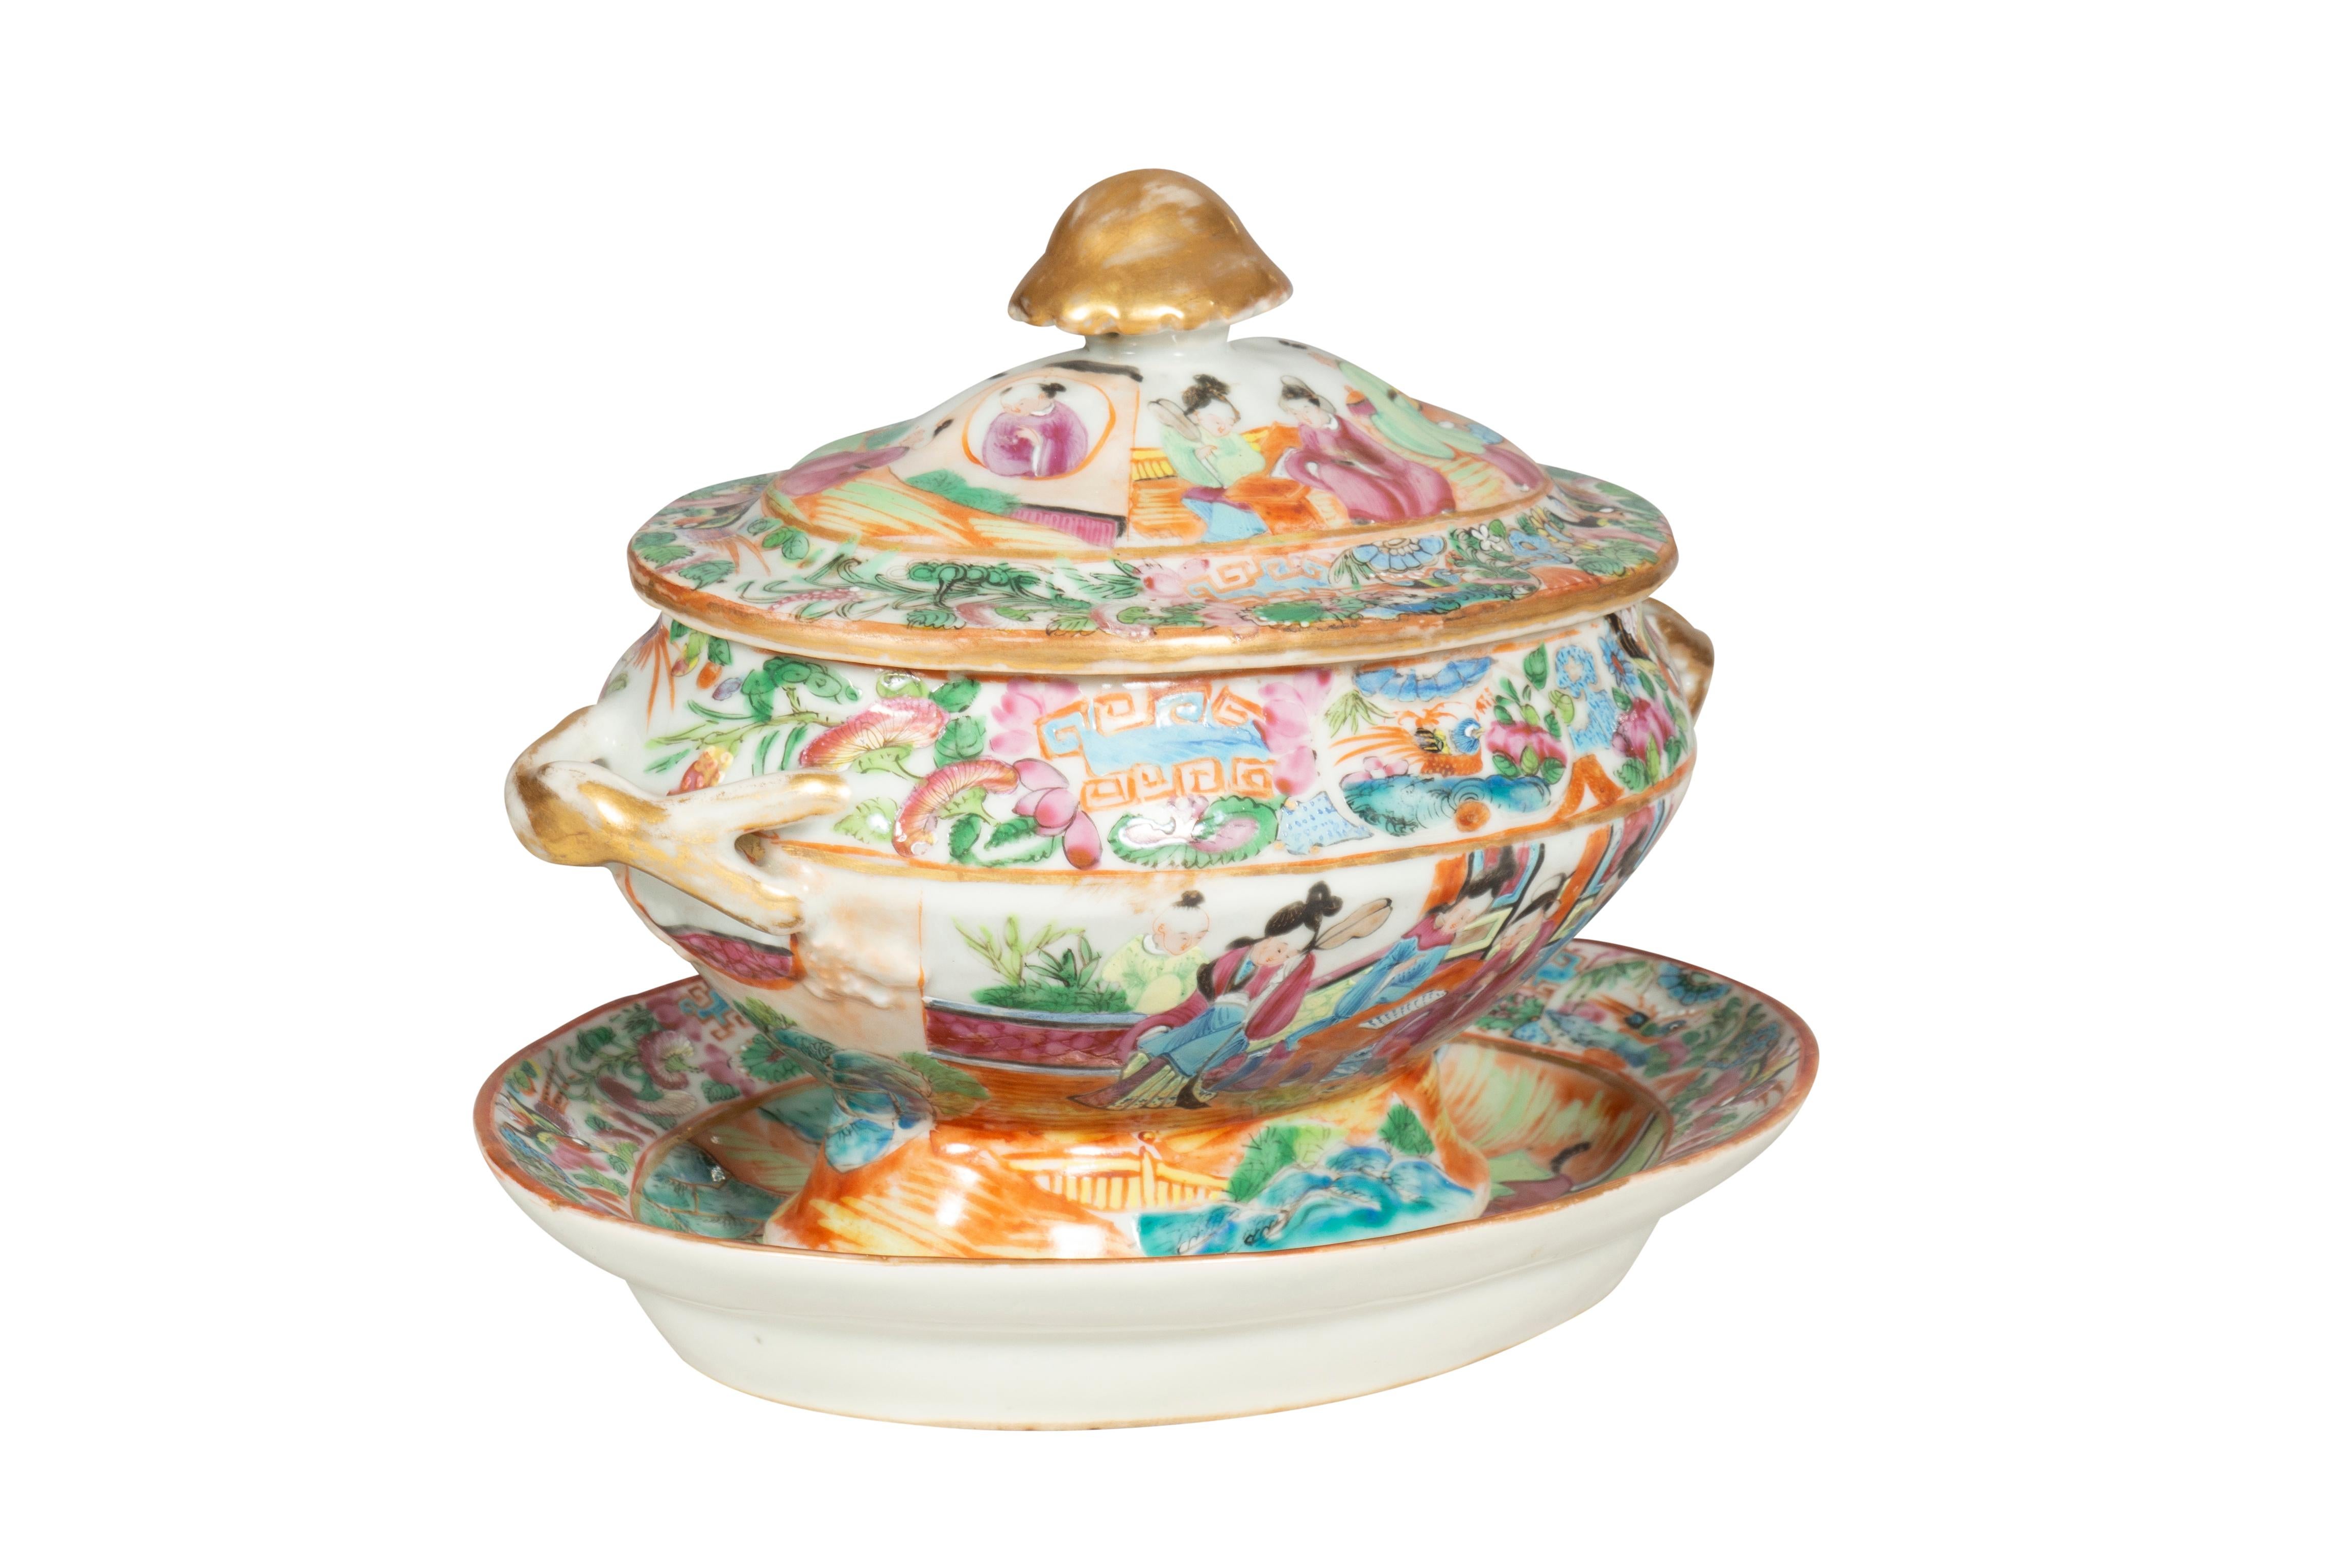 Porcelain Chinese Export Rose Mandarin Sauce Tureen And Underplate For Sale